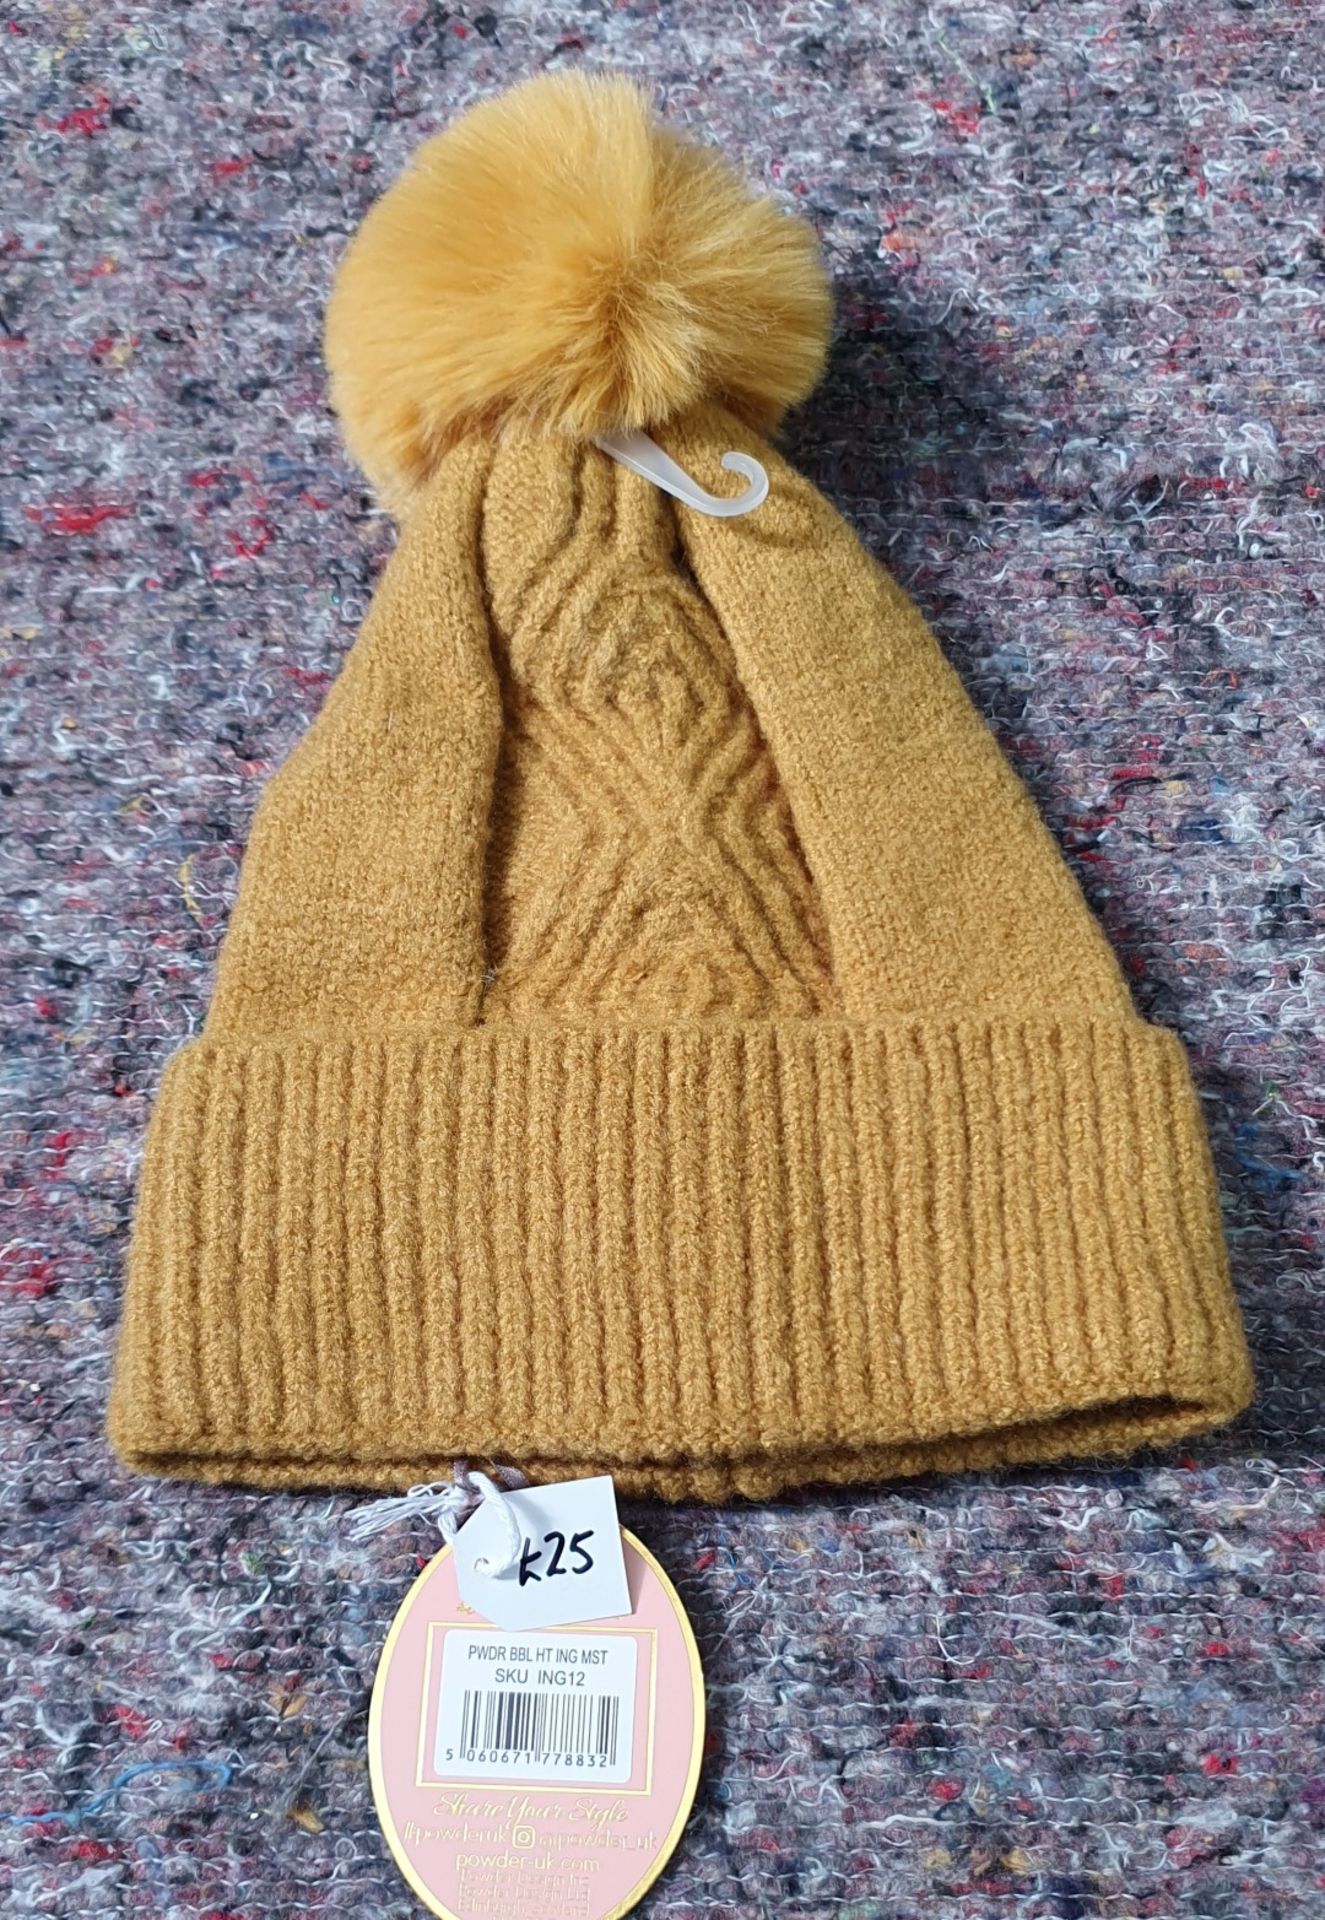 7 x Powder Adults Woolly Bobble Hats - New Stock - RRP Between £25-30 Each- Ref: TCH241 - CL840 - - Image 10 of 10